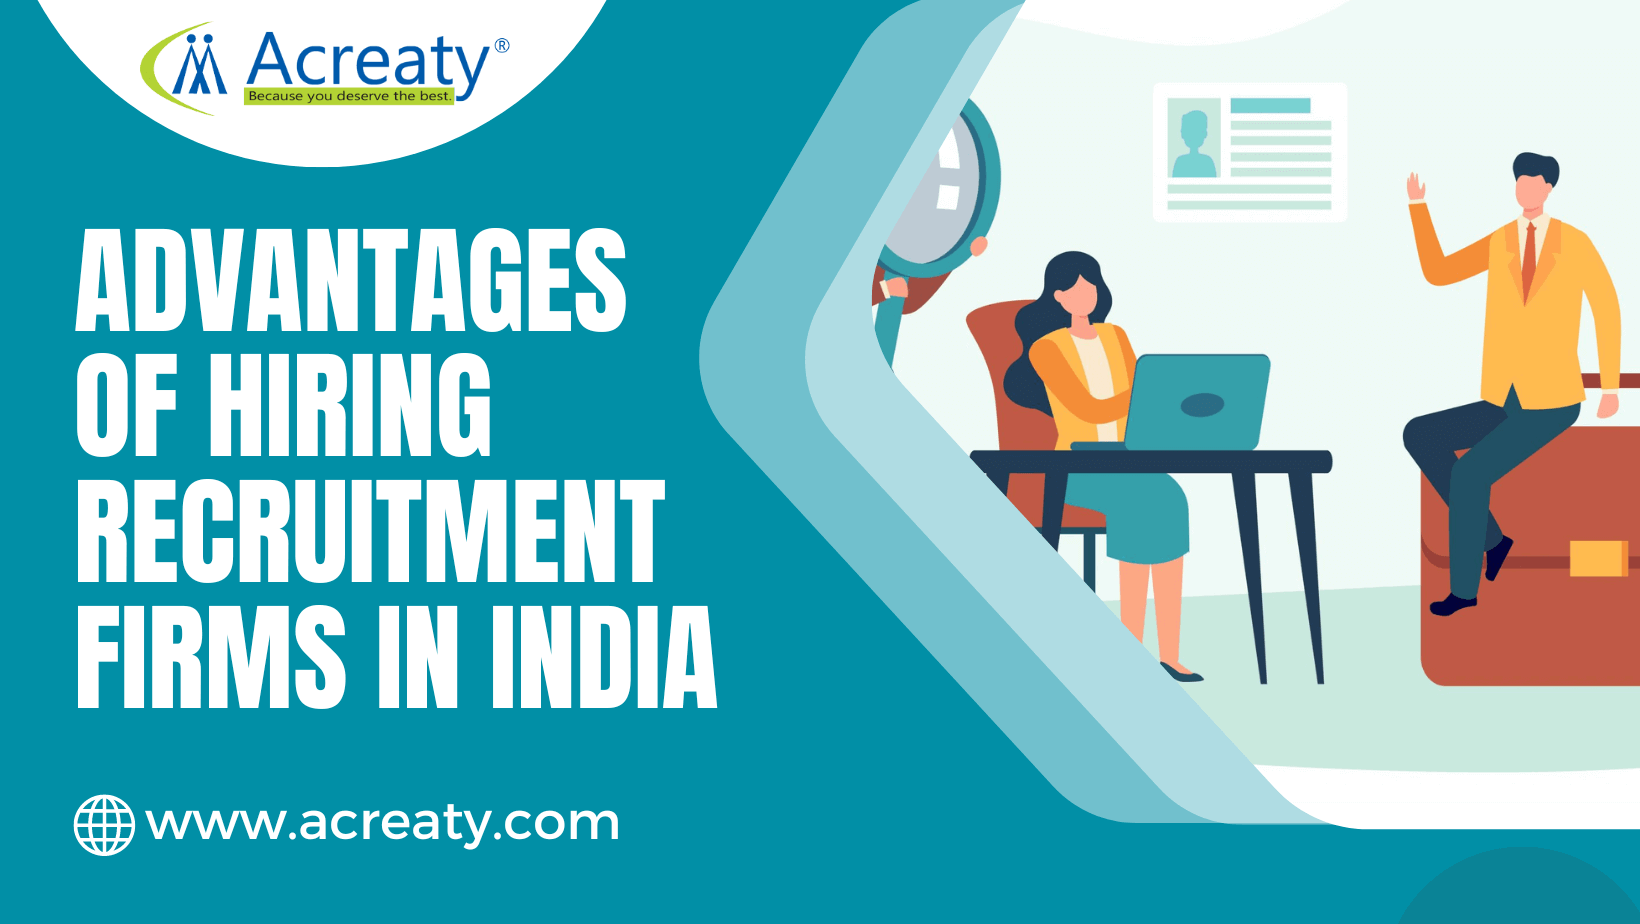 Incredible Competitive Advantages of hiring Recruitment firms in India